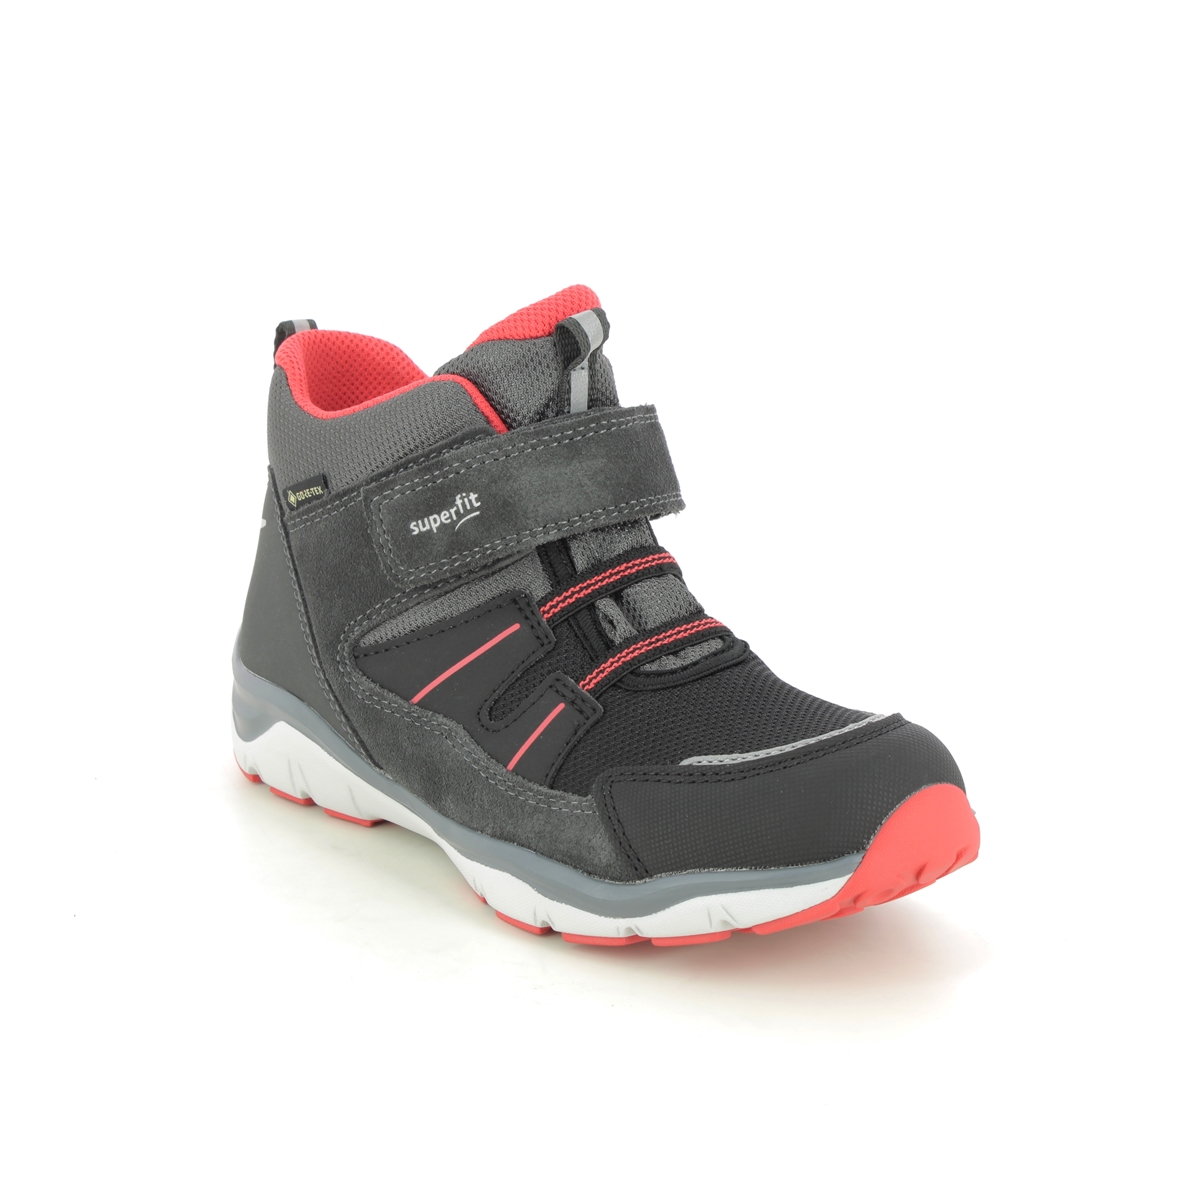 Superfit Sport5 Gore Tex Grey Red Kids boys boots 1000247-2000 in a Plain Leather and Textile in Size 35